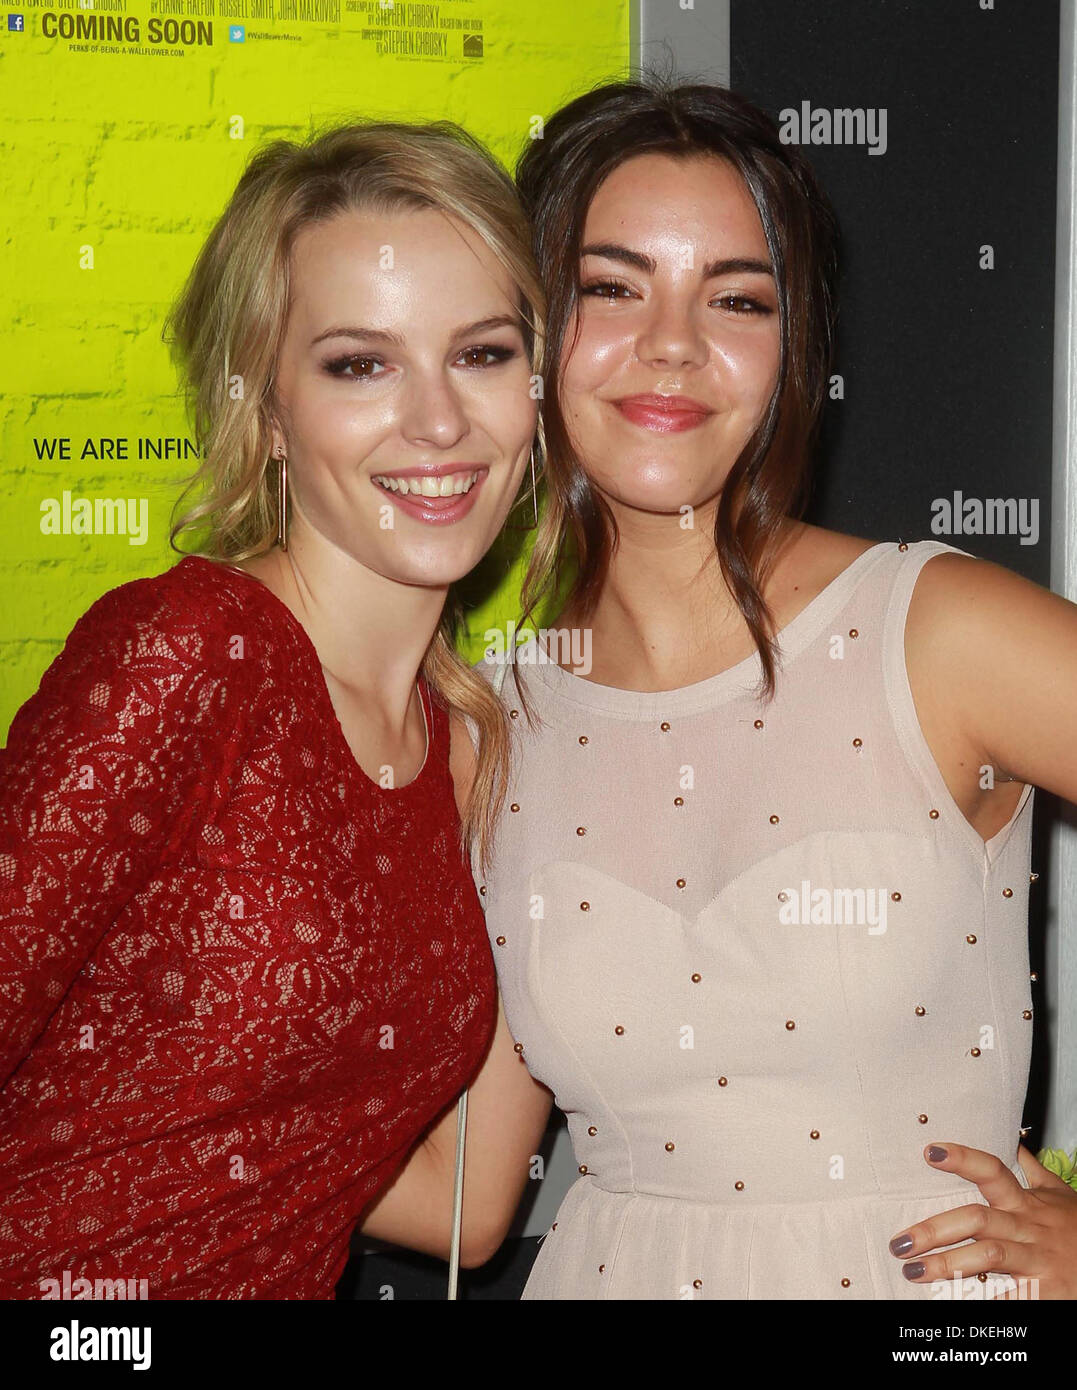 Bridgit Mendler Samantha Boscarino Los Angeles Premiere of 'The Perks of Being a Wallflower' at ArcLight Cinerama Dome - Stock Photo